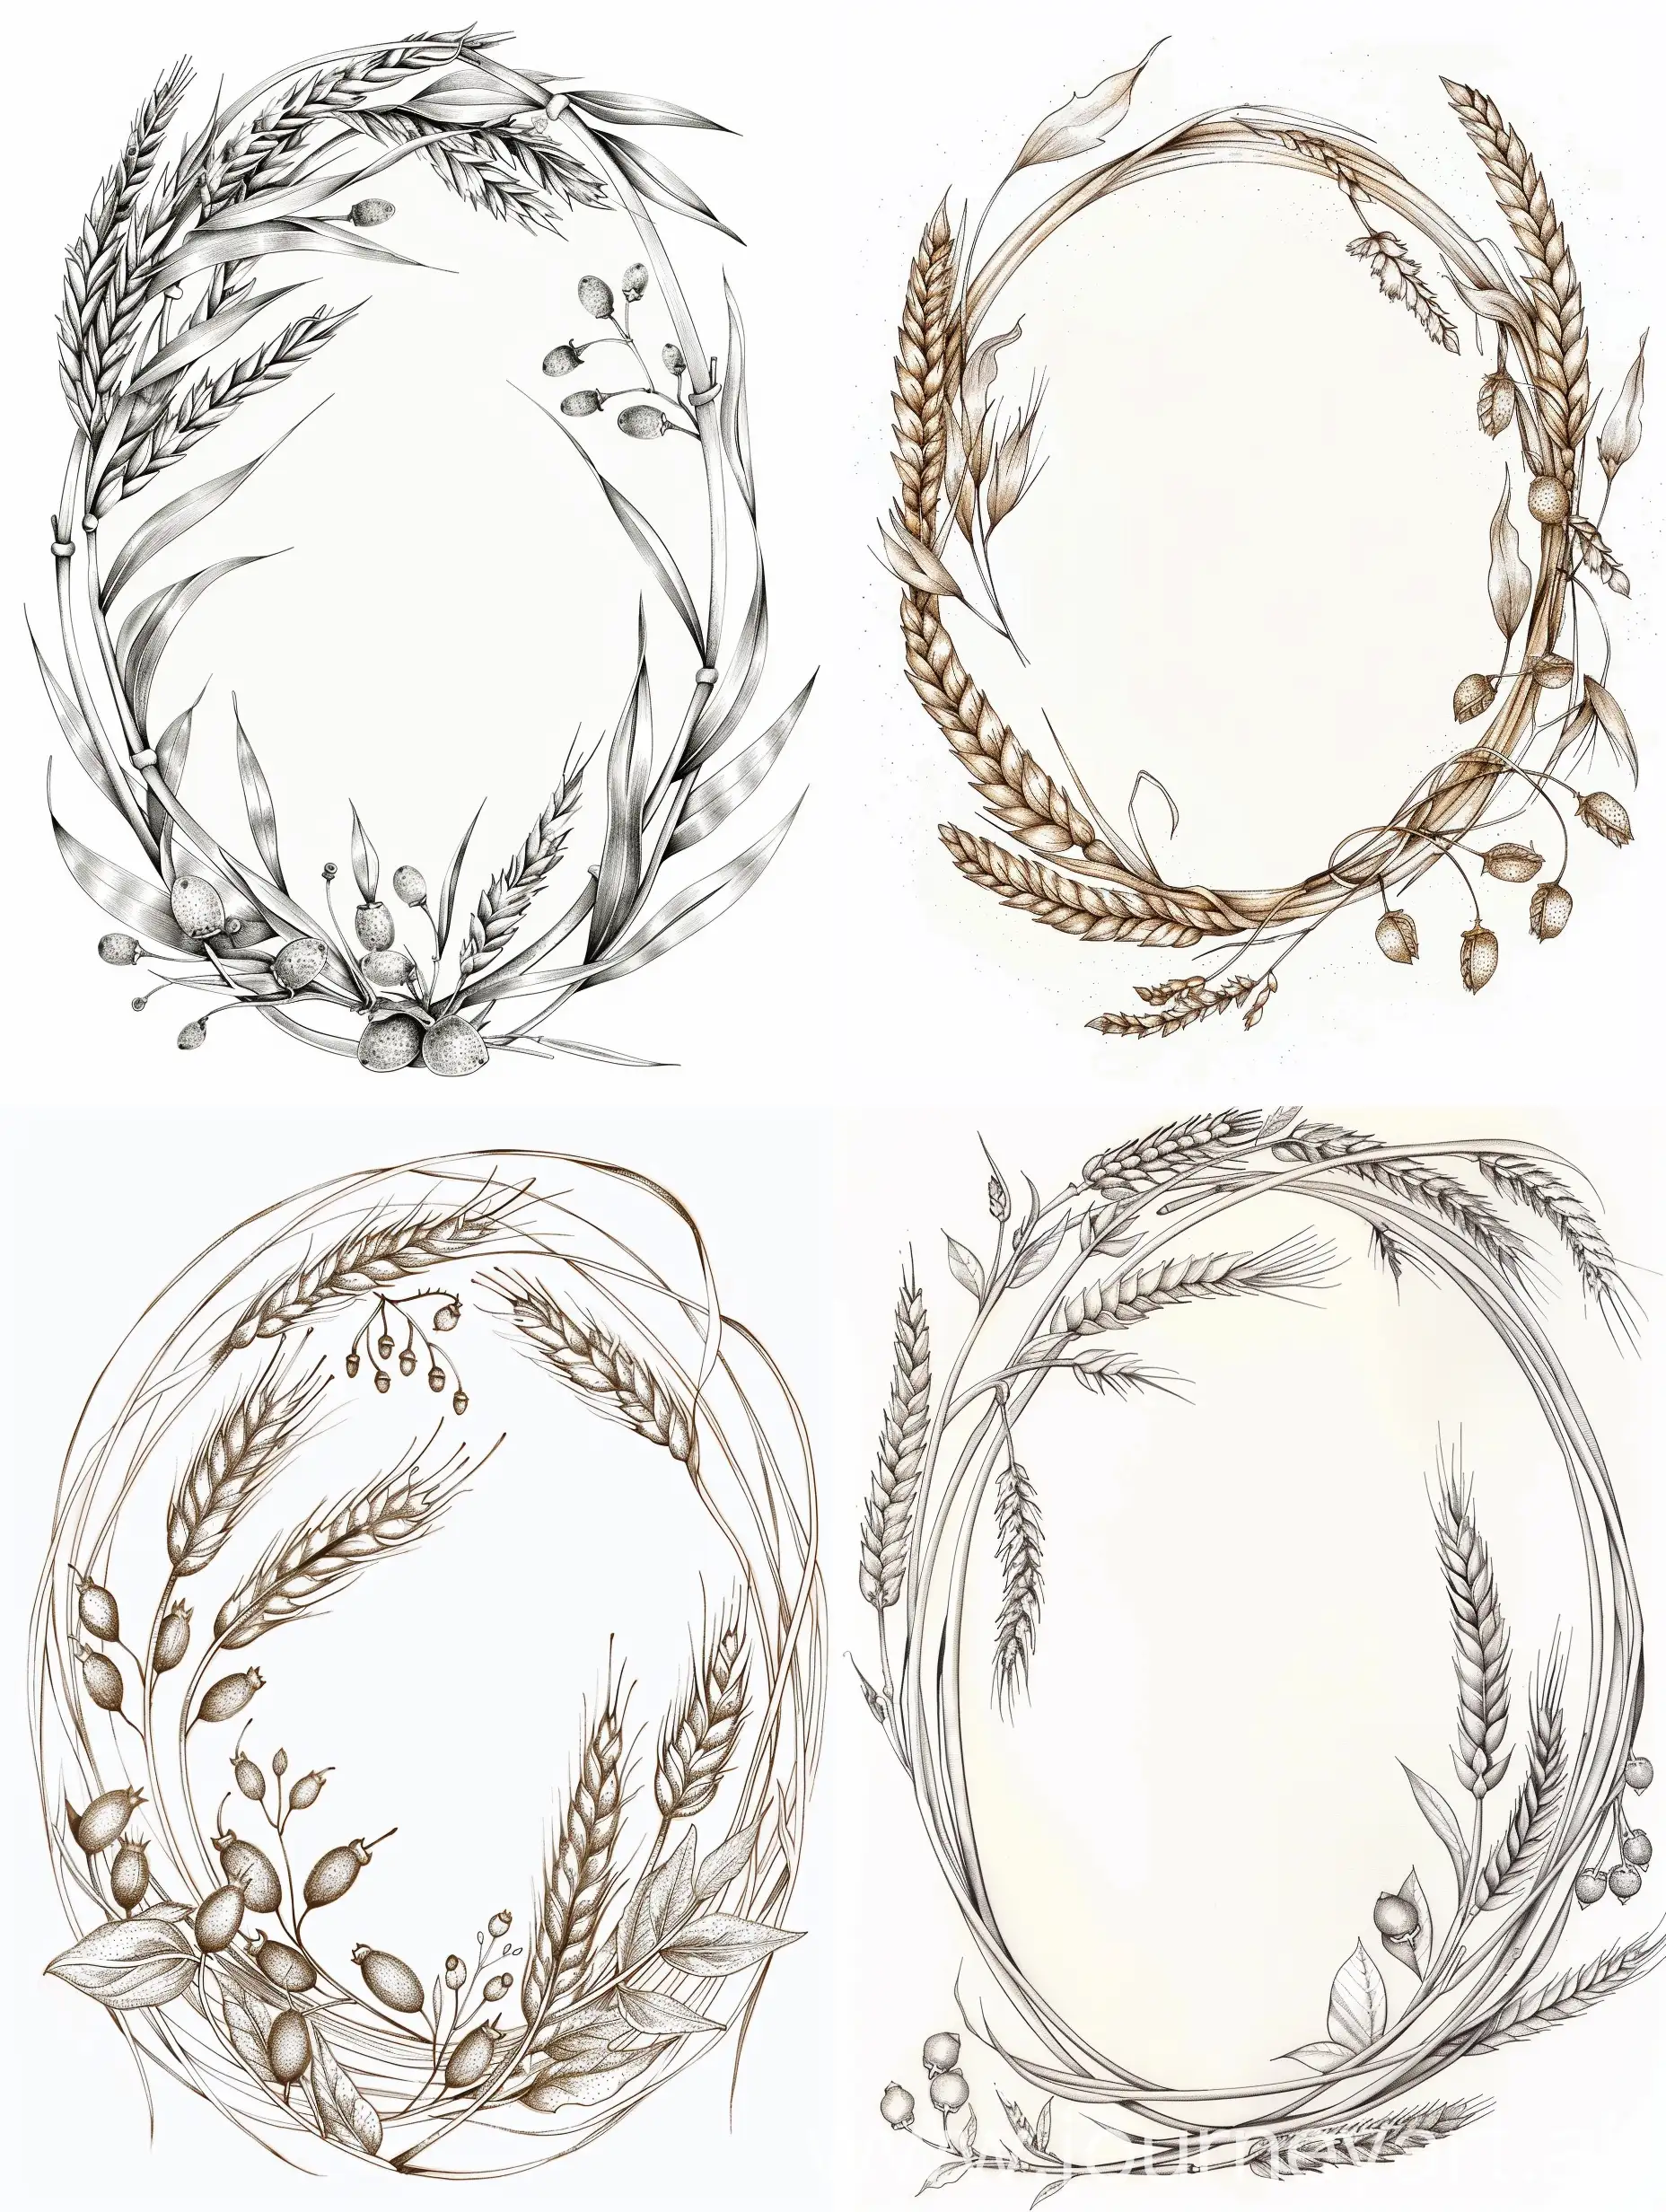 Oval-shaped frame consisting of small wheat spikelets intertwined with long lines in the form of wheat leaves, as well as small fruits of bitter pepper, illustration on a white background, light ink